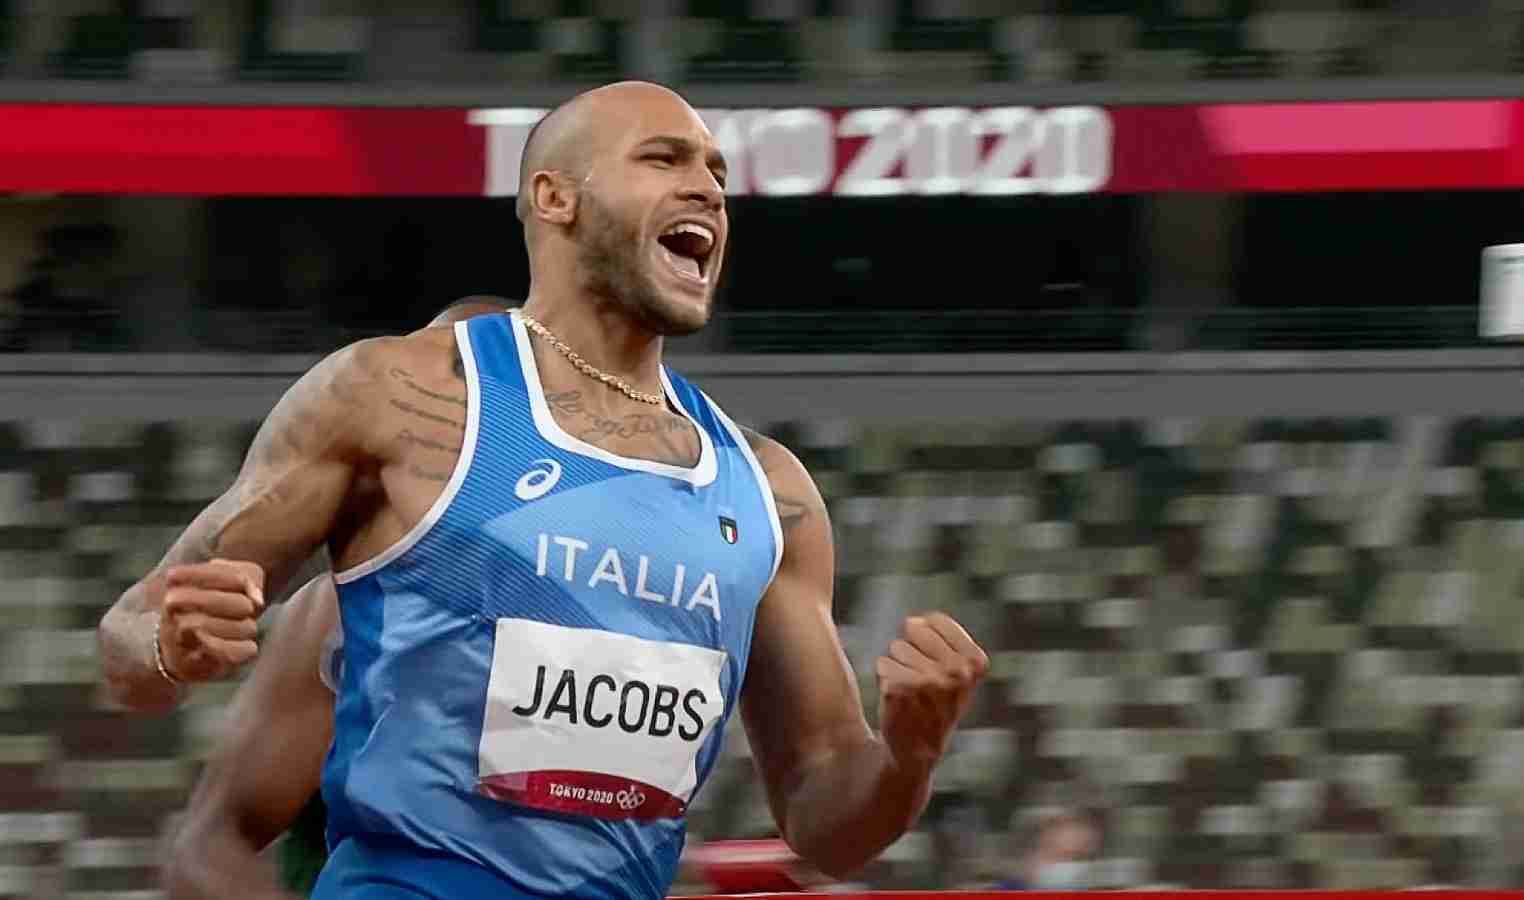 Marcell Jacobs to run 200m at Savona meeting in May